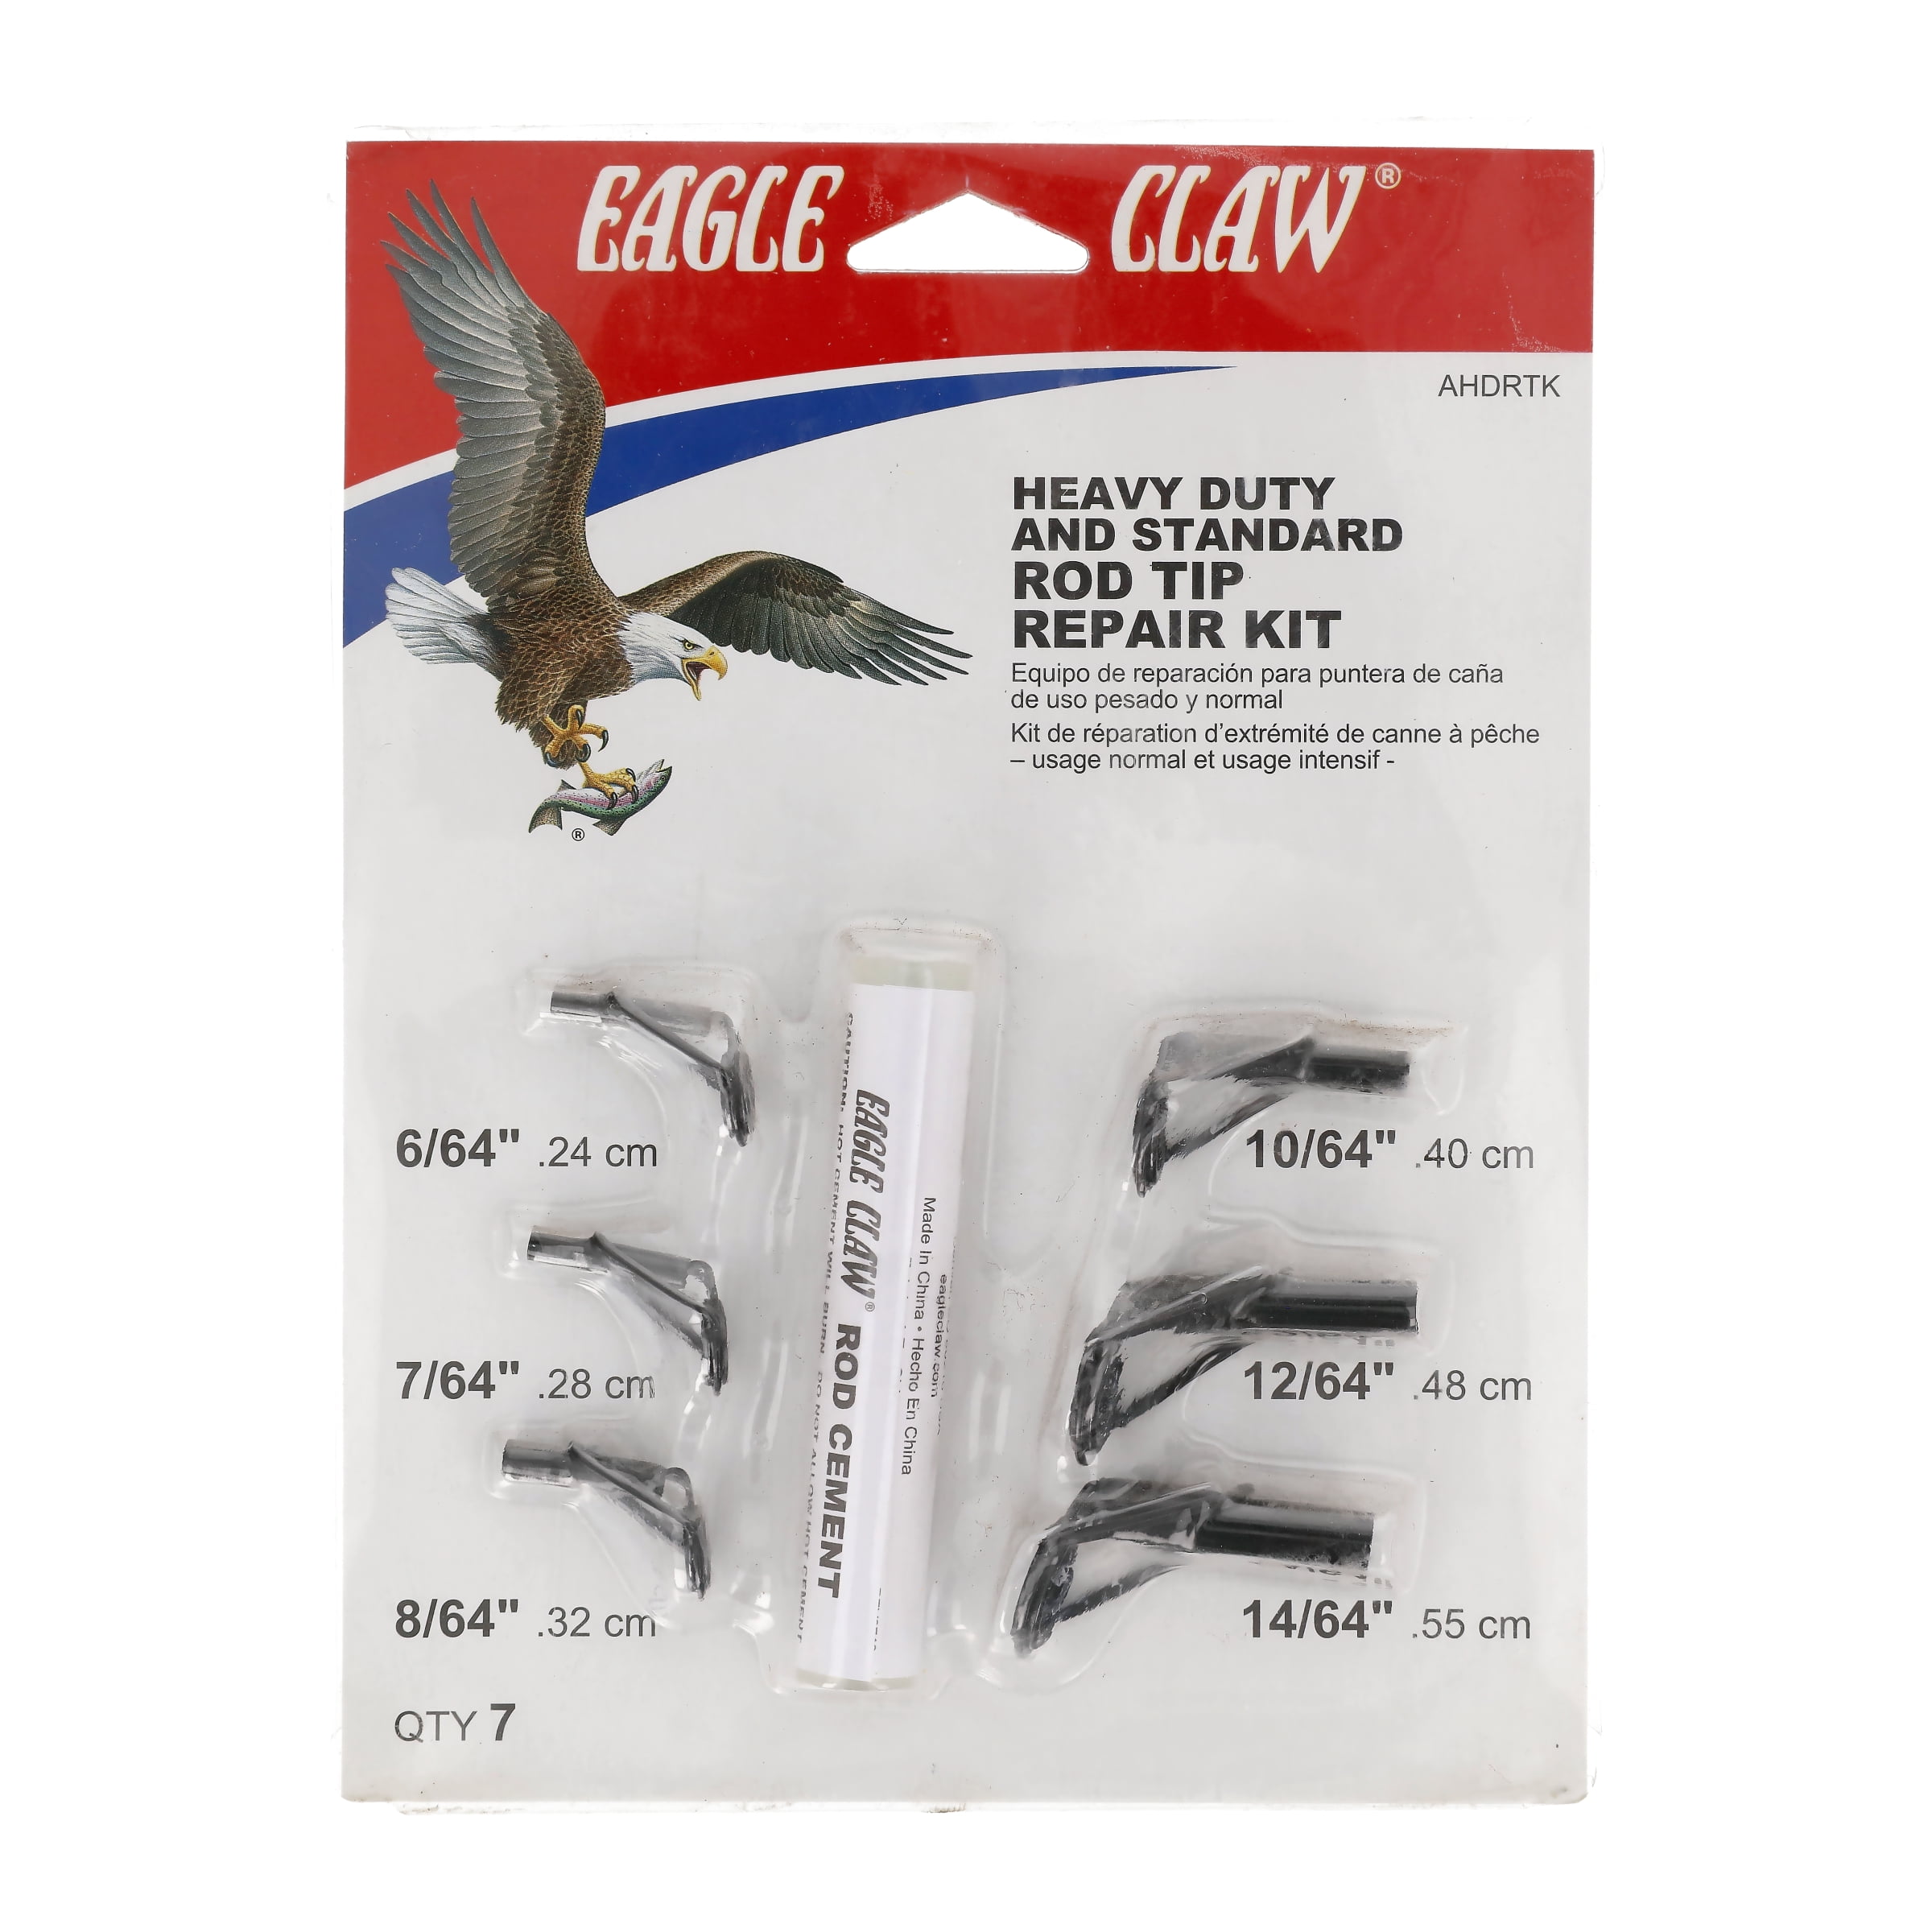 Fishing Eagle Claw AHDRTK Heavy Duty Stainless Rod Tip Repair Kit 6-Piece 